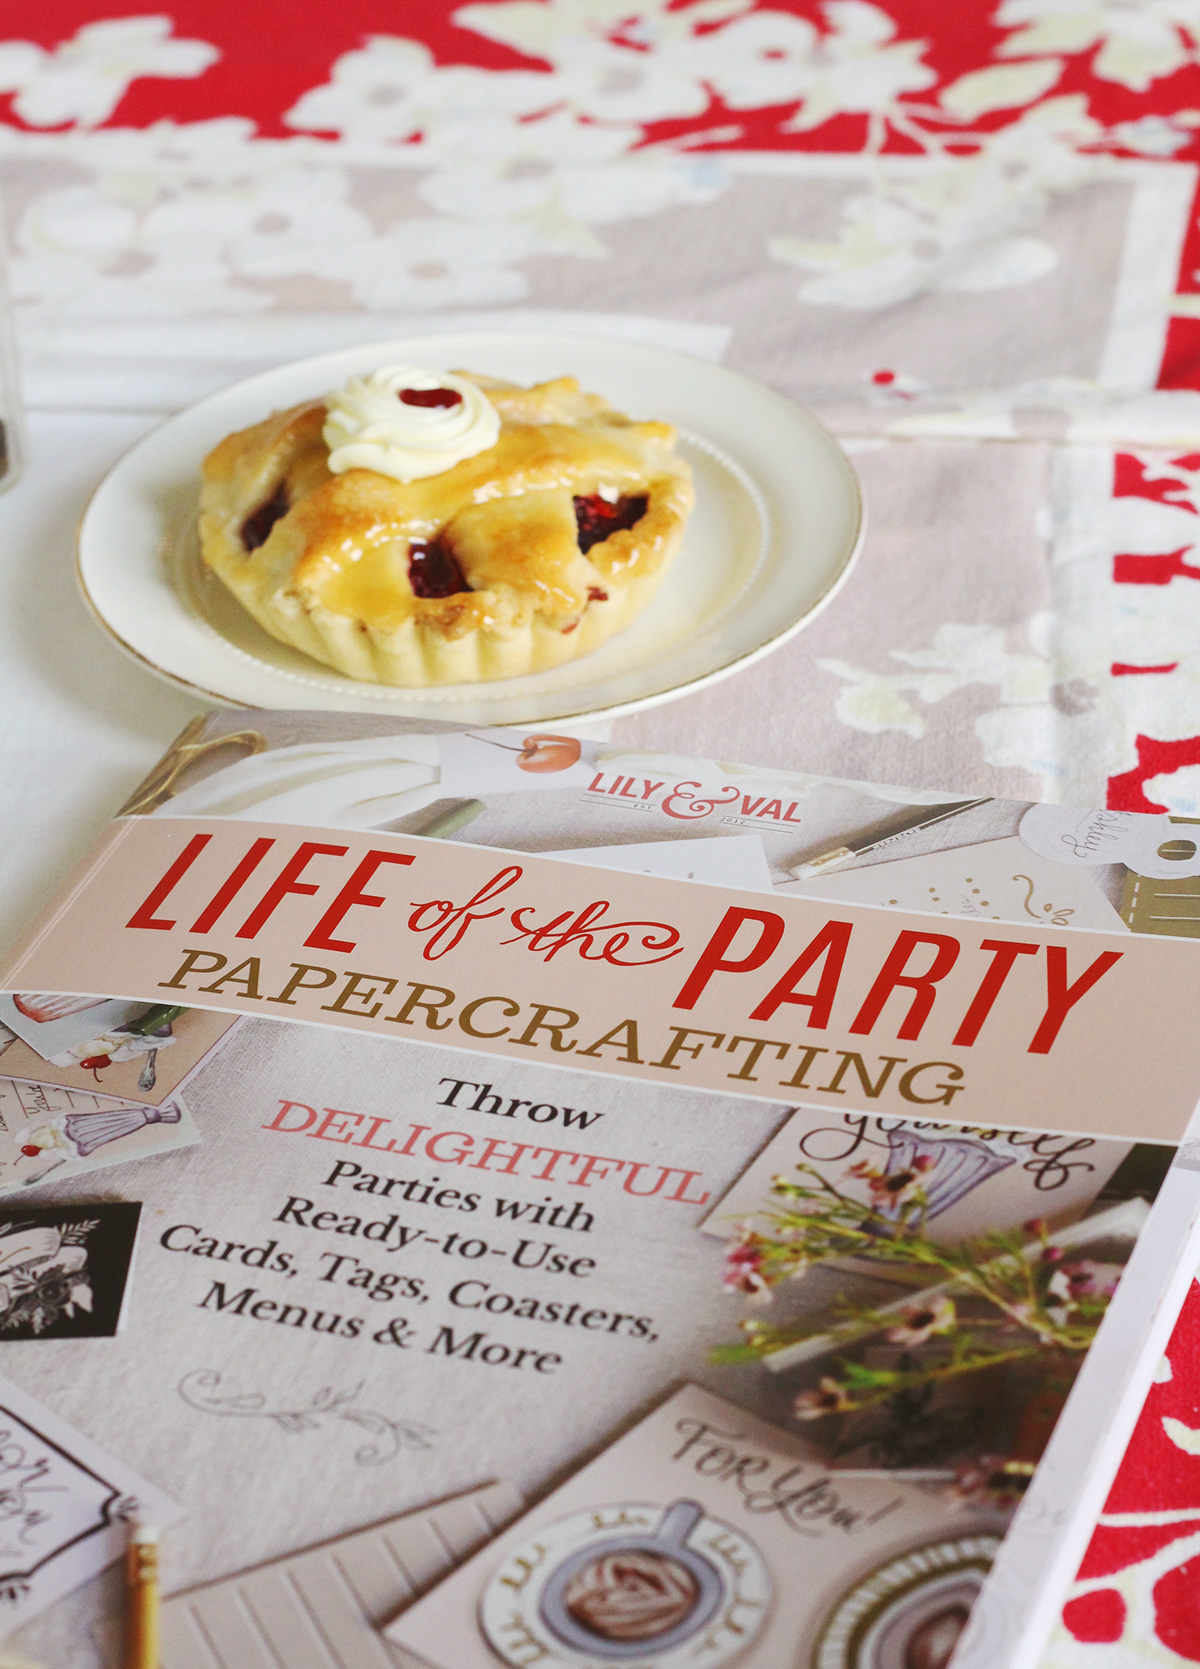 Life Of The Party Papercrafting is an entire book of paper crafts for parties. Perfect for paper lovers and scrapbookers!